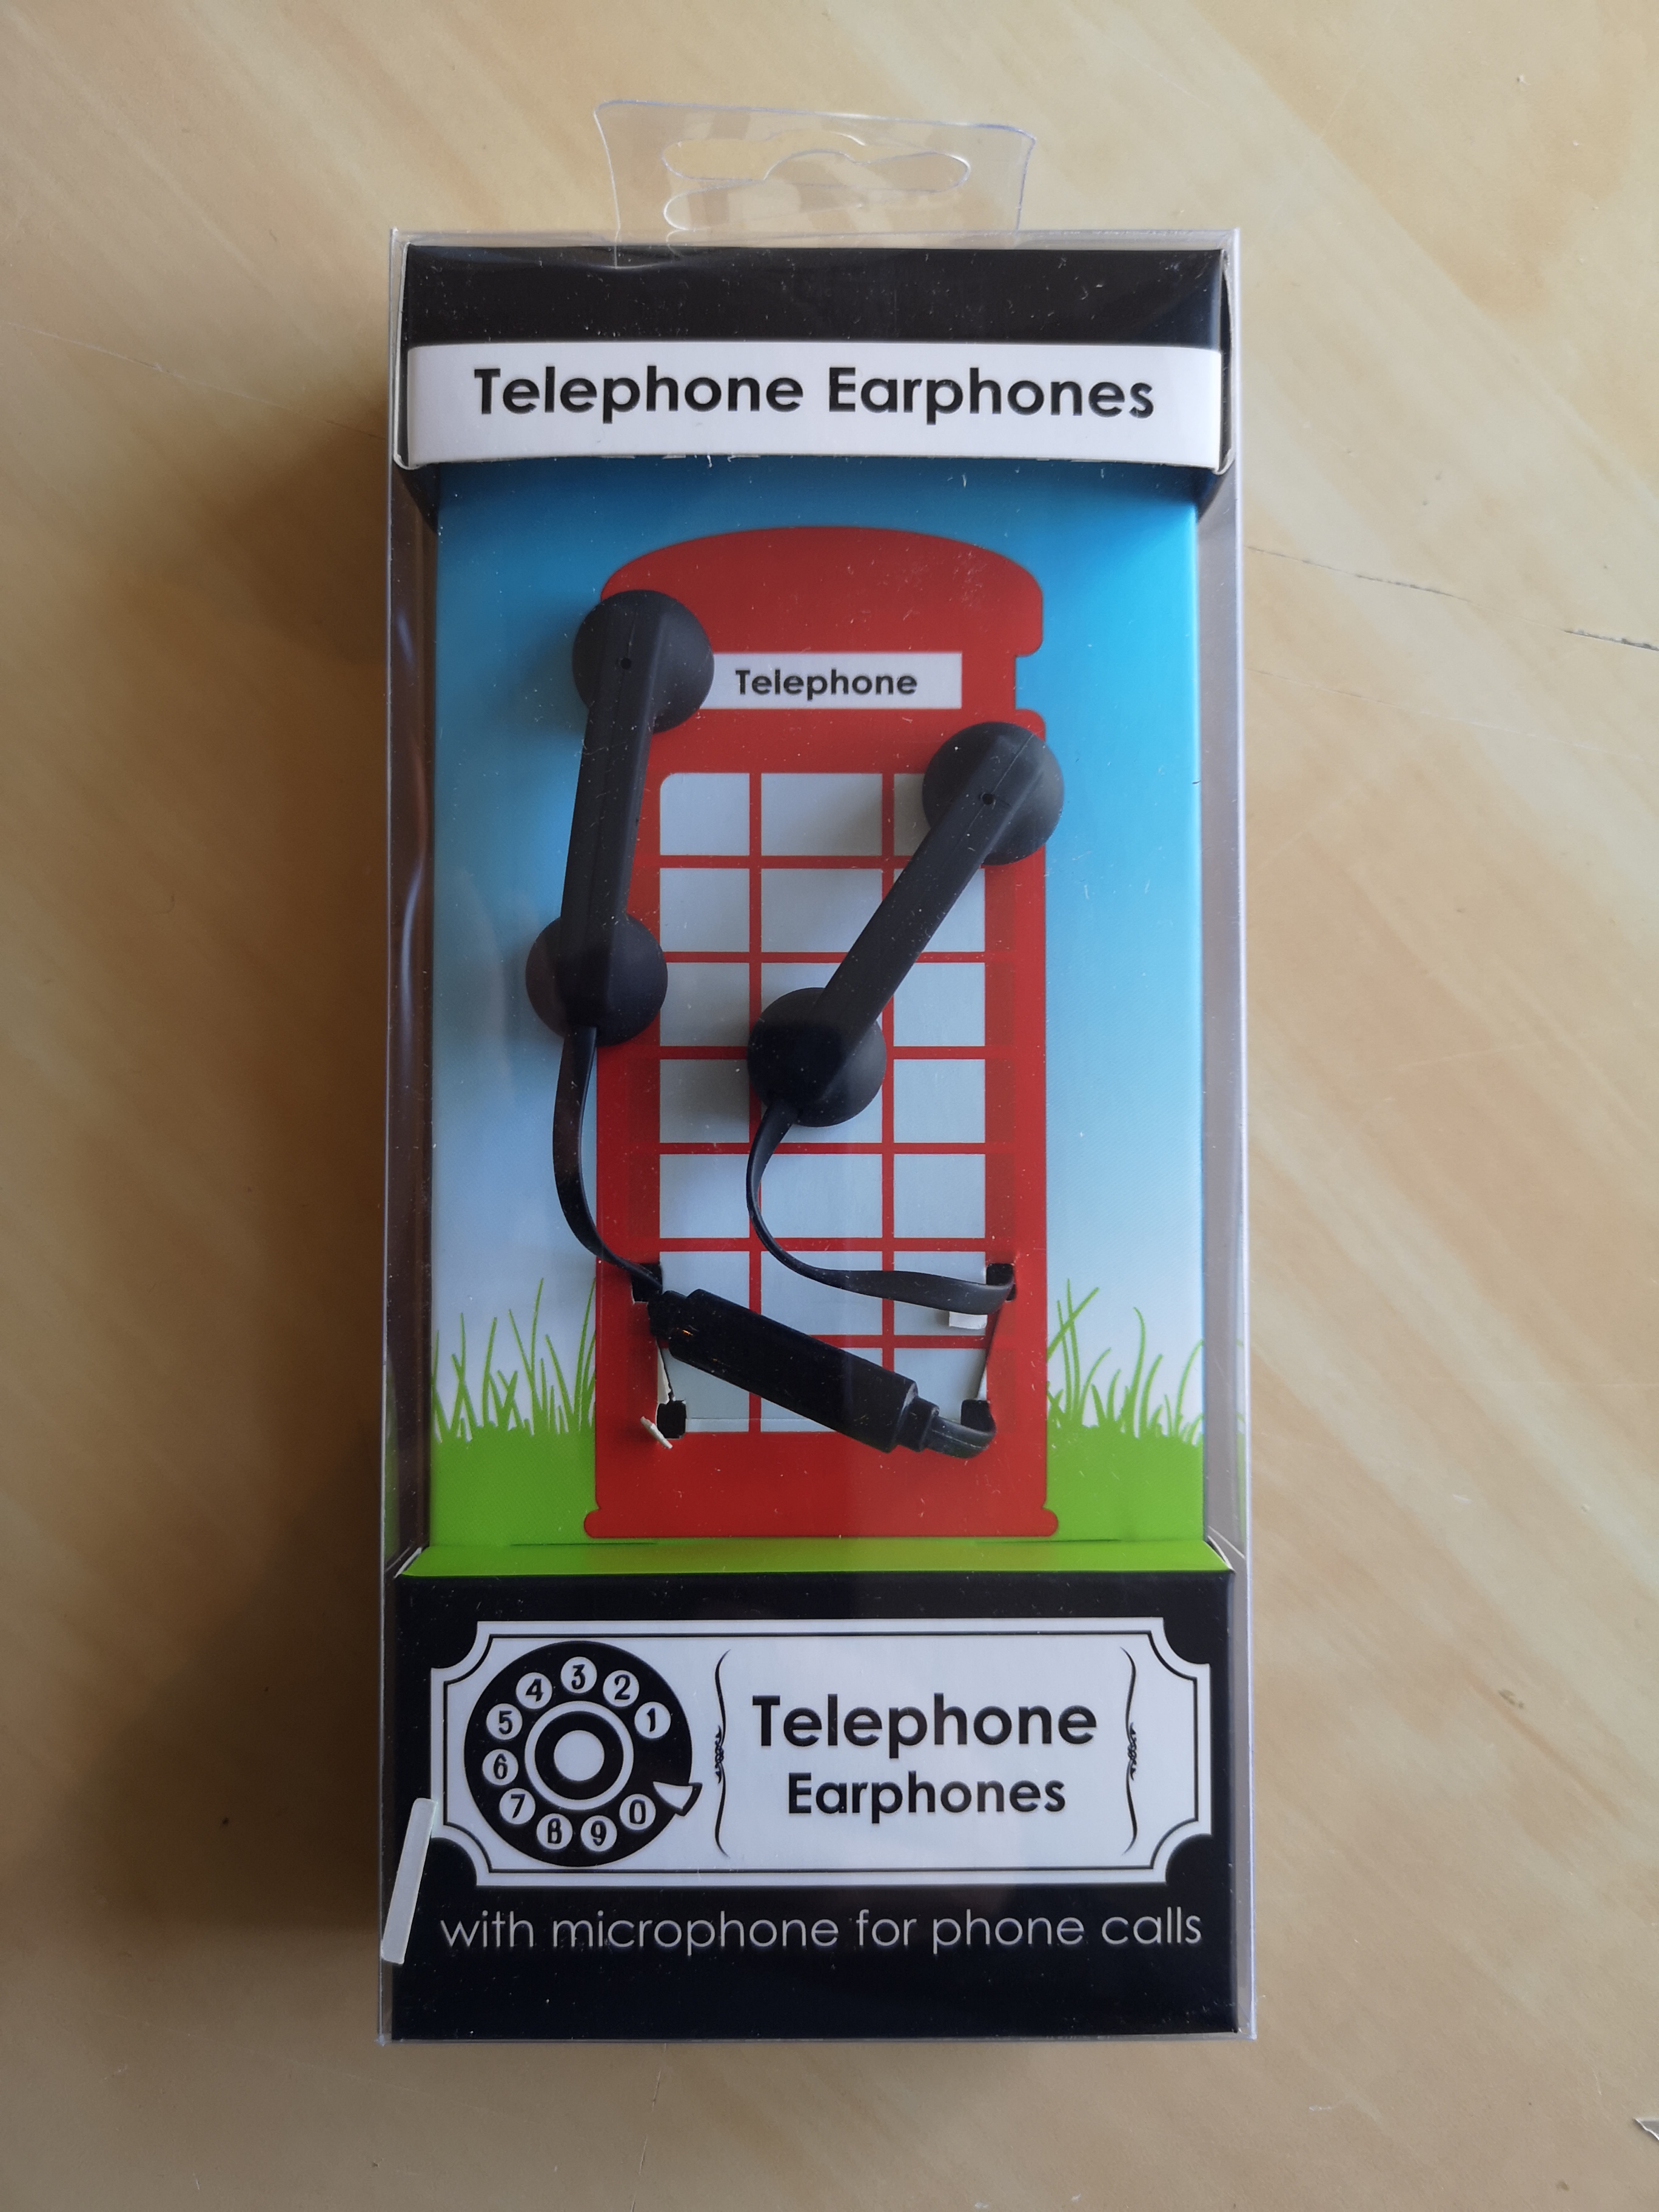 x11 Retro Telephone Earphones - Earbuds with Microphone by DZine